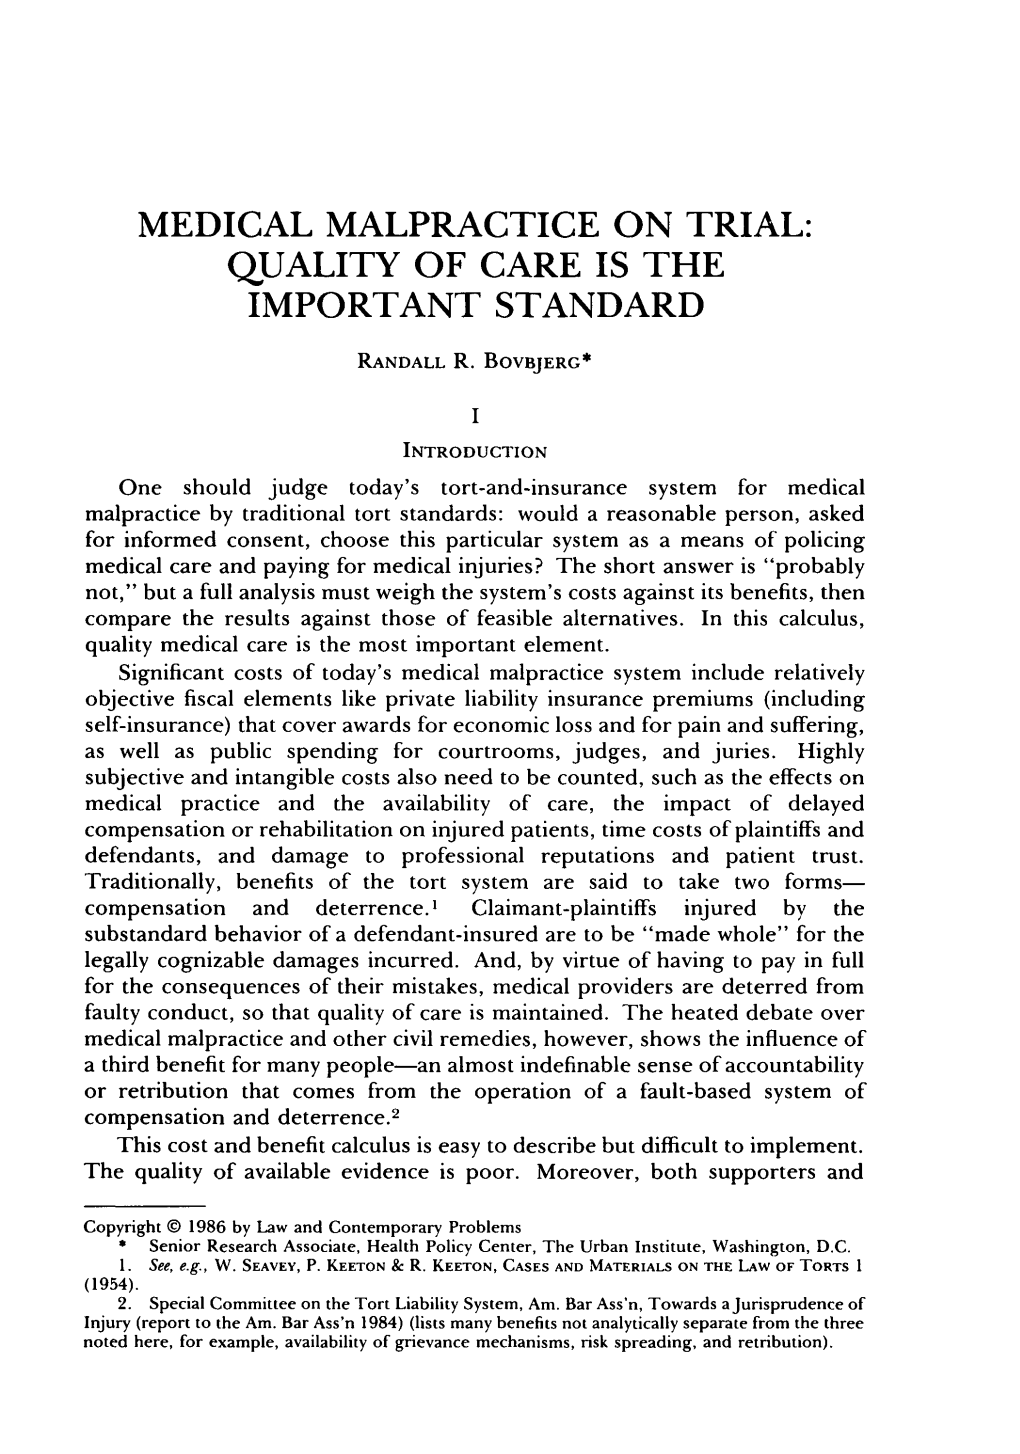 Medical Malpractice on Trial: Quality of Care Is the Important Standard